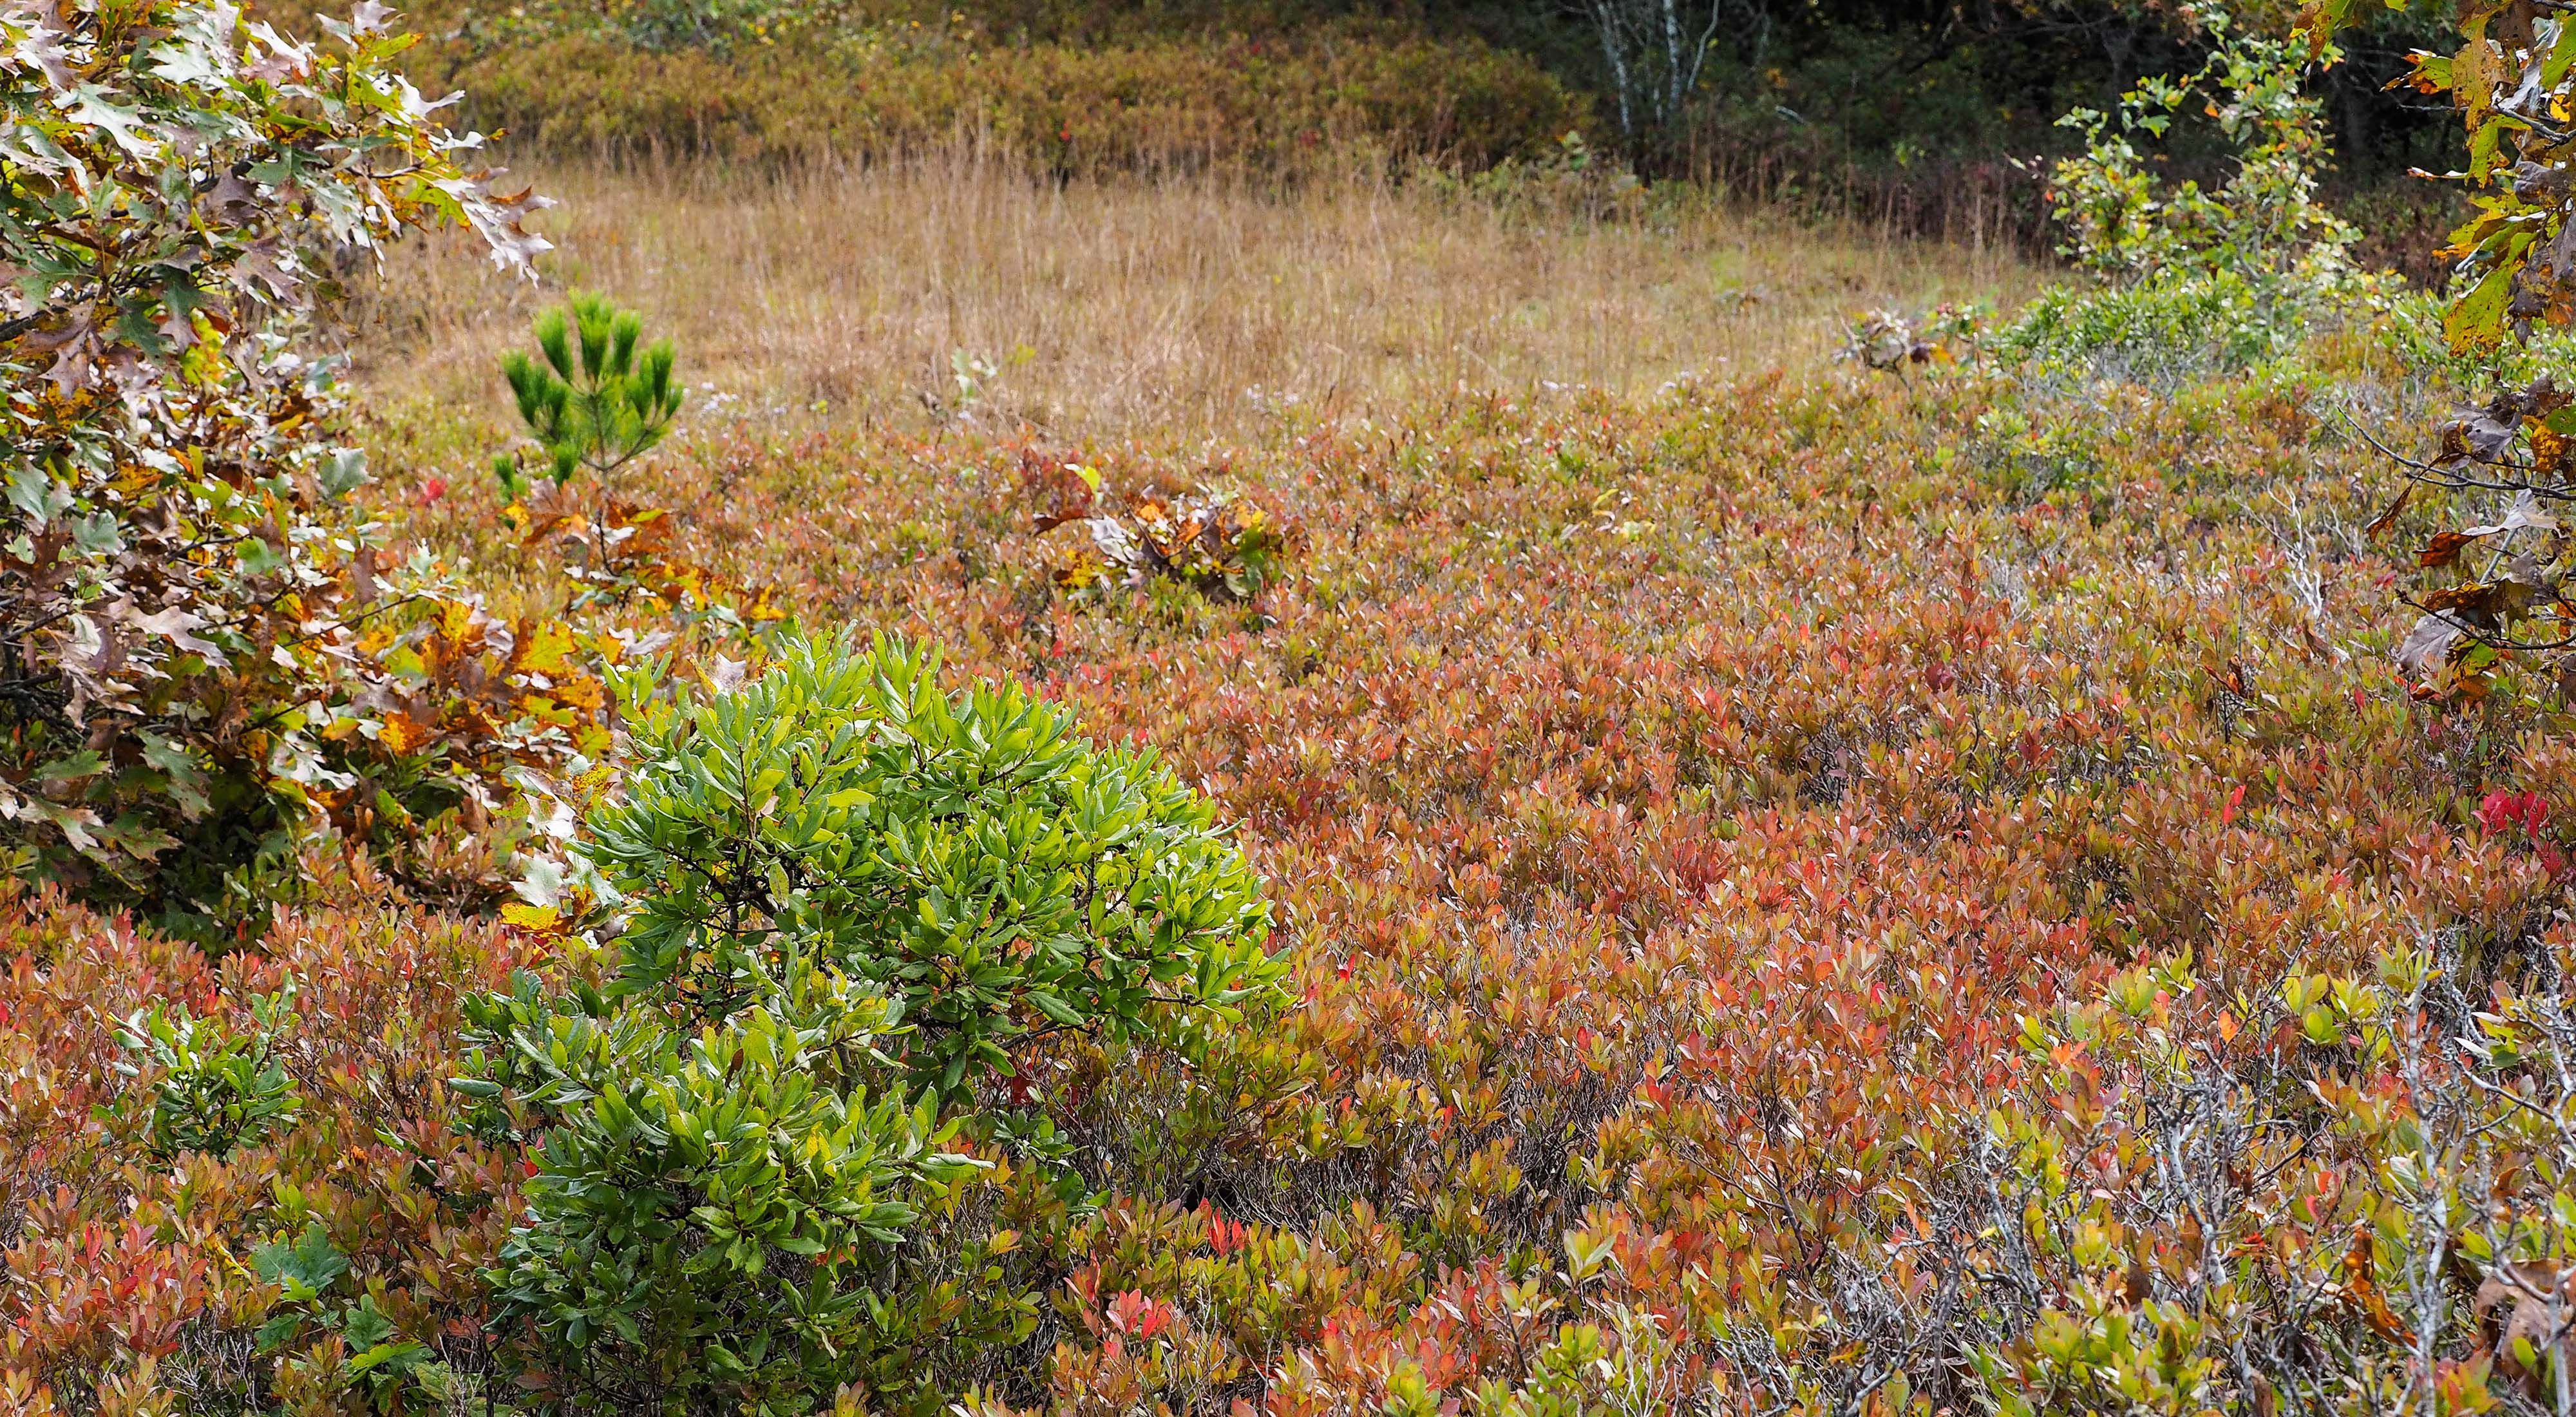 Maritime grassland with colorful shrubs and bushy plant.